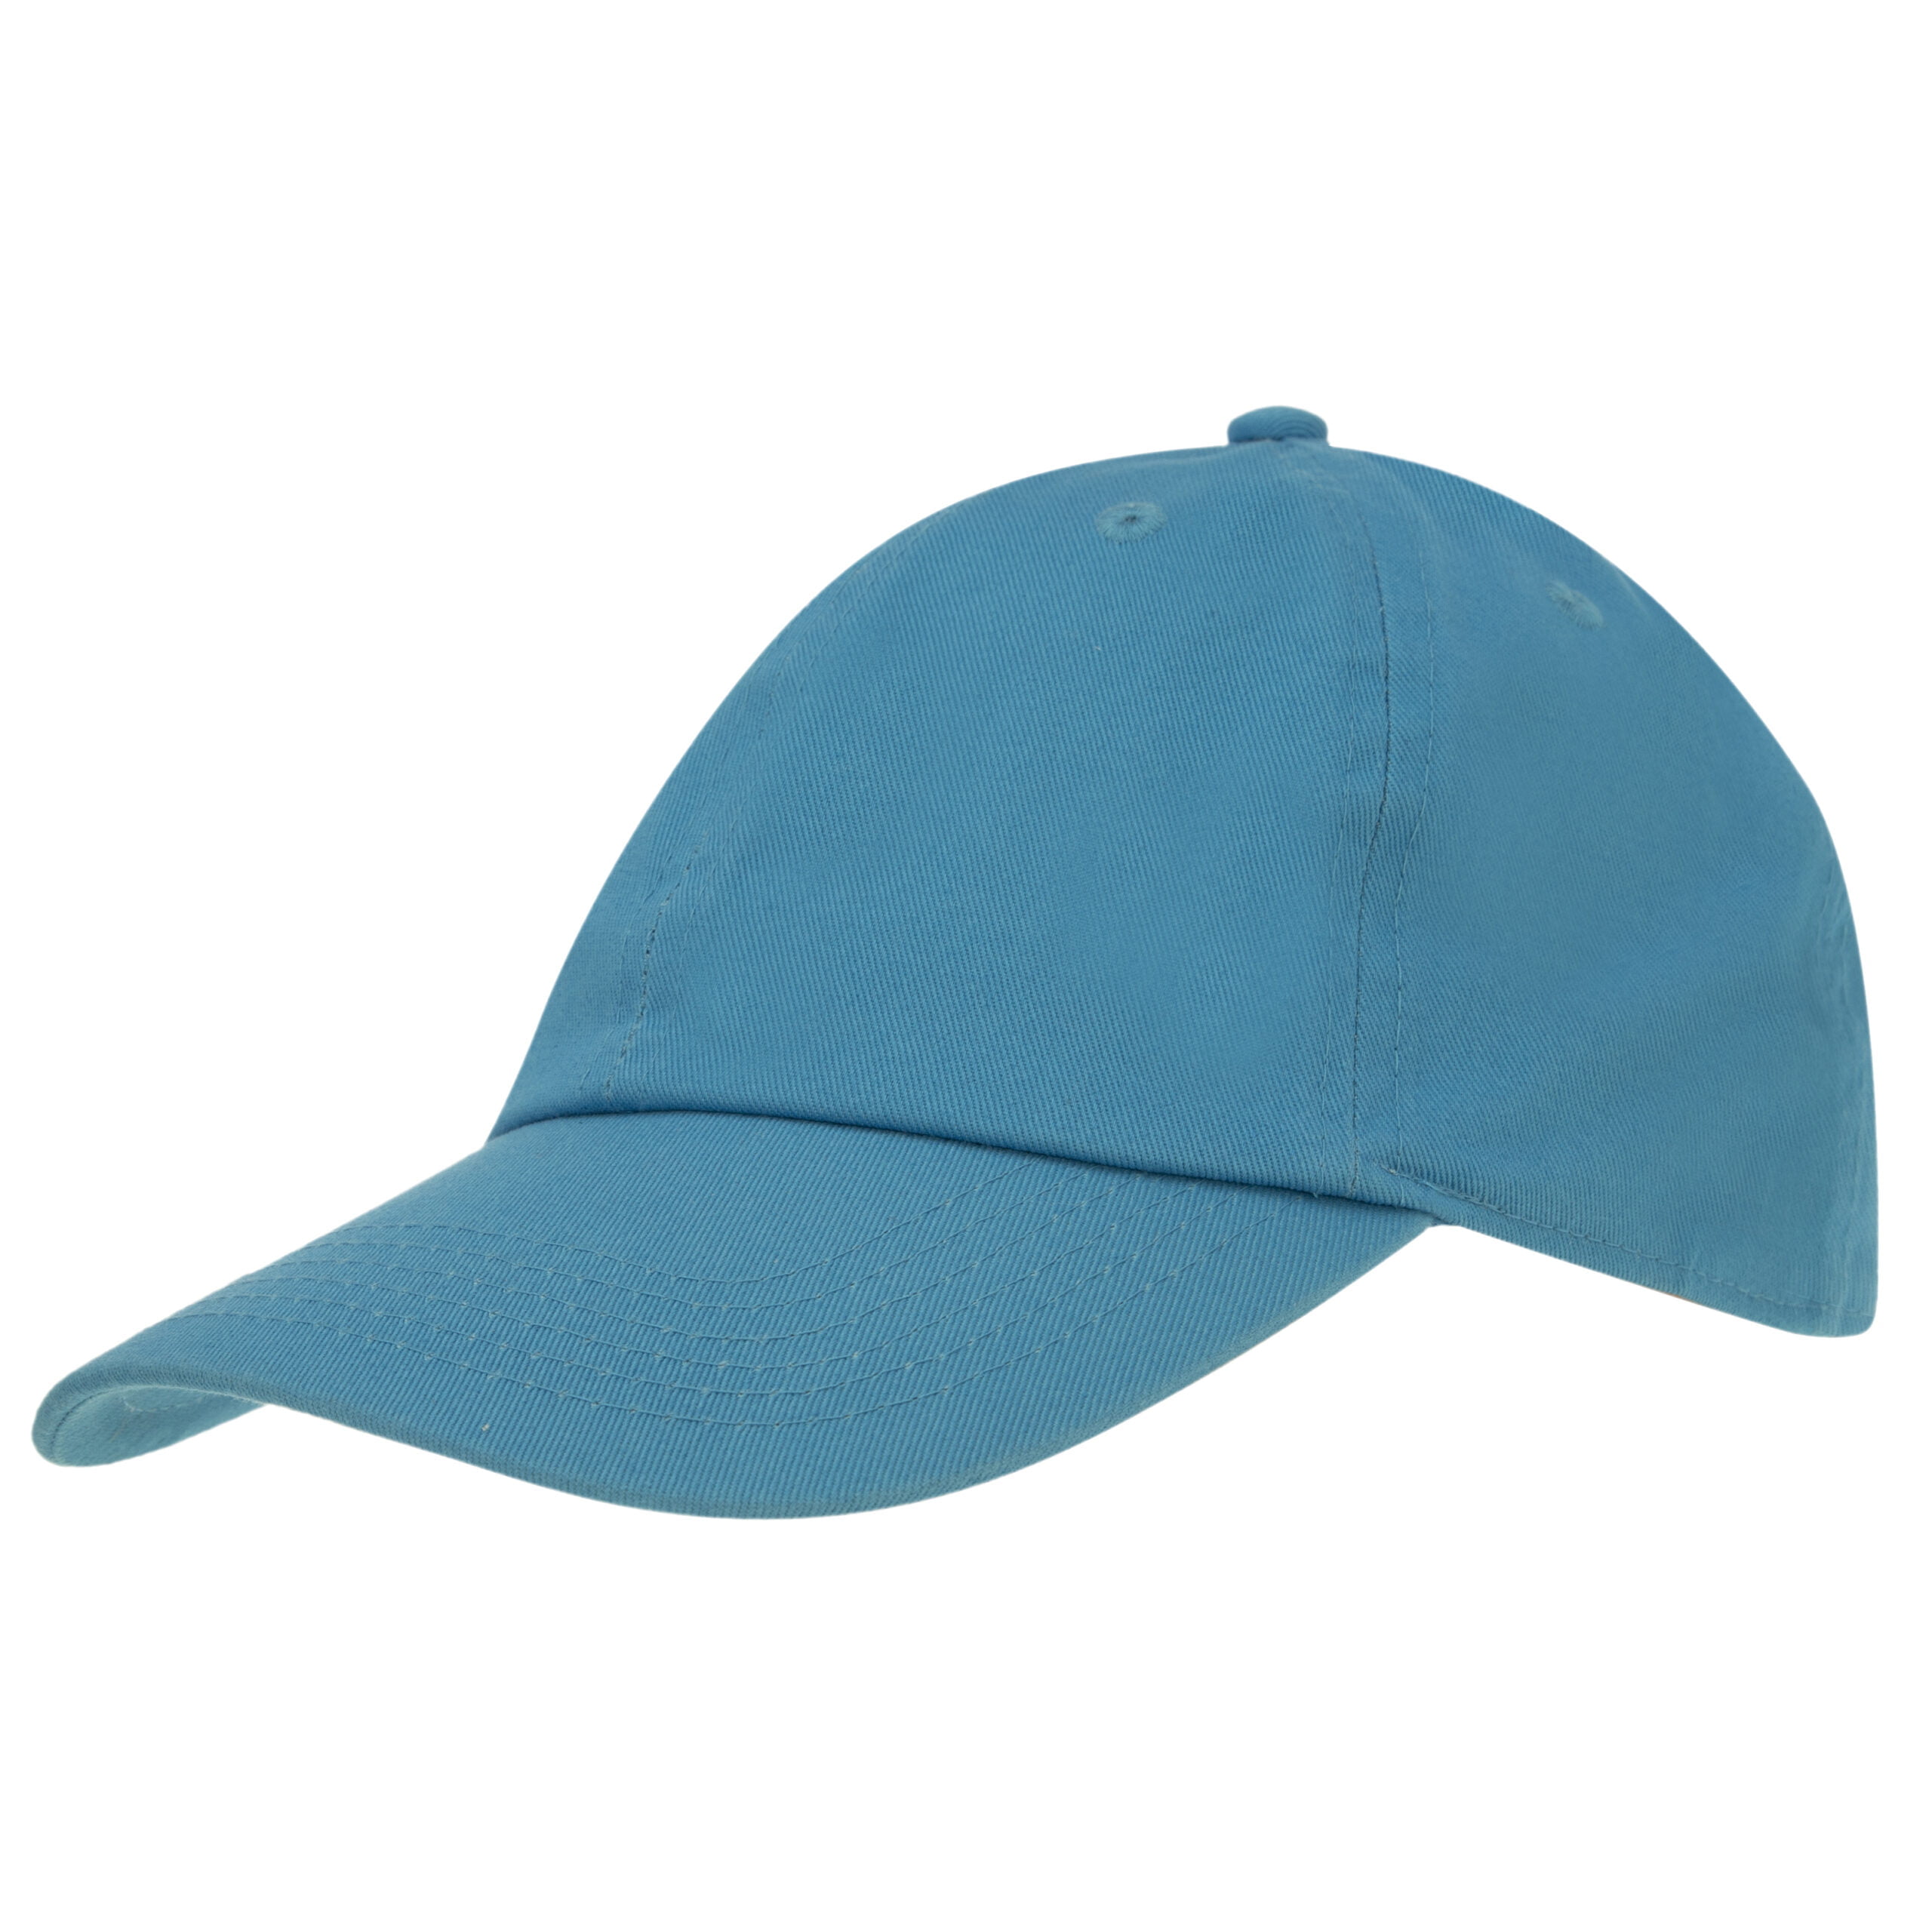 1pc Turquoise Baseball Cotton Cap - Dad Hat - Low Profile - Stone Washed